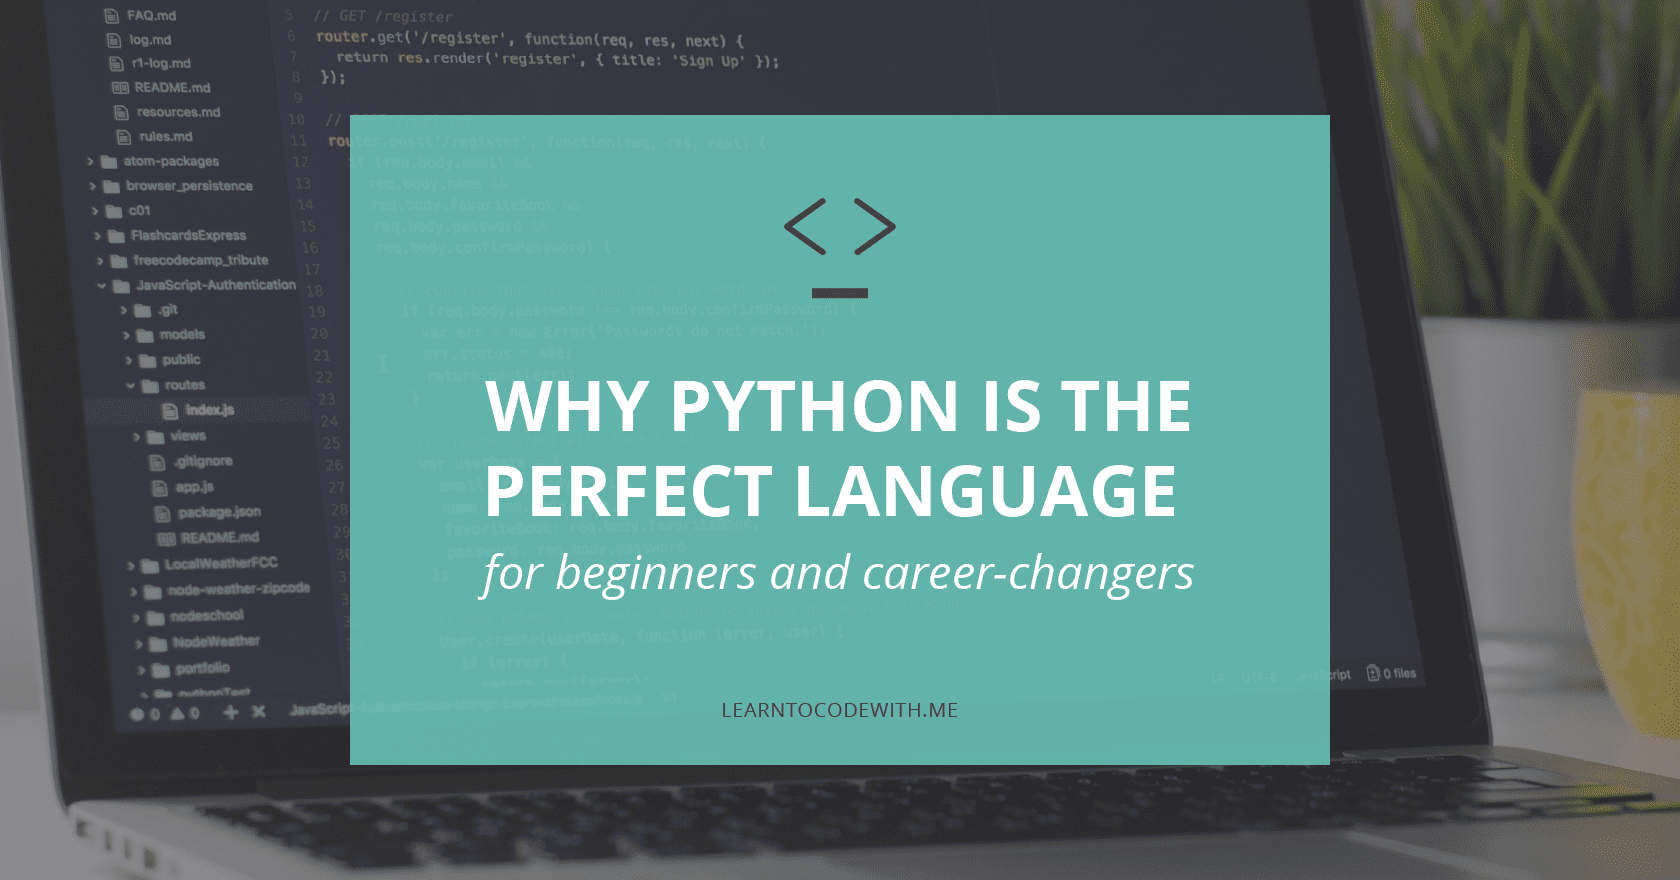 Why Learn Python? Why Python is the perfect language for beginners and career-changers